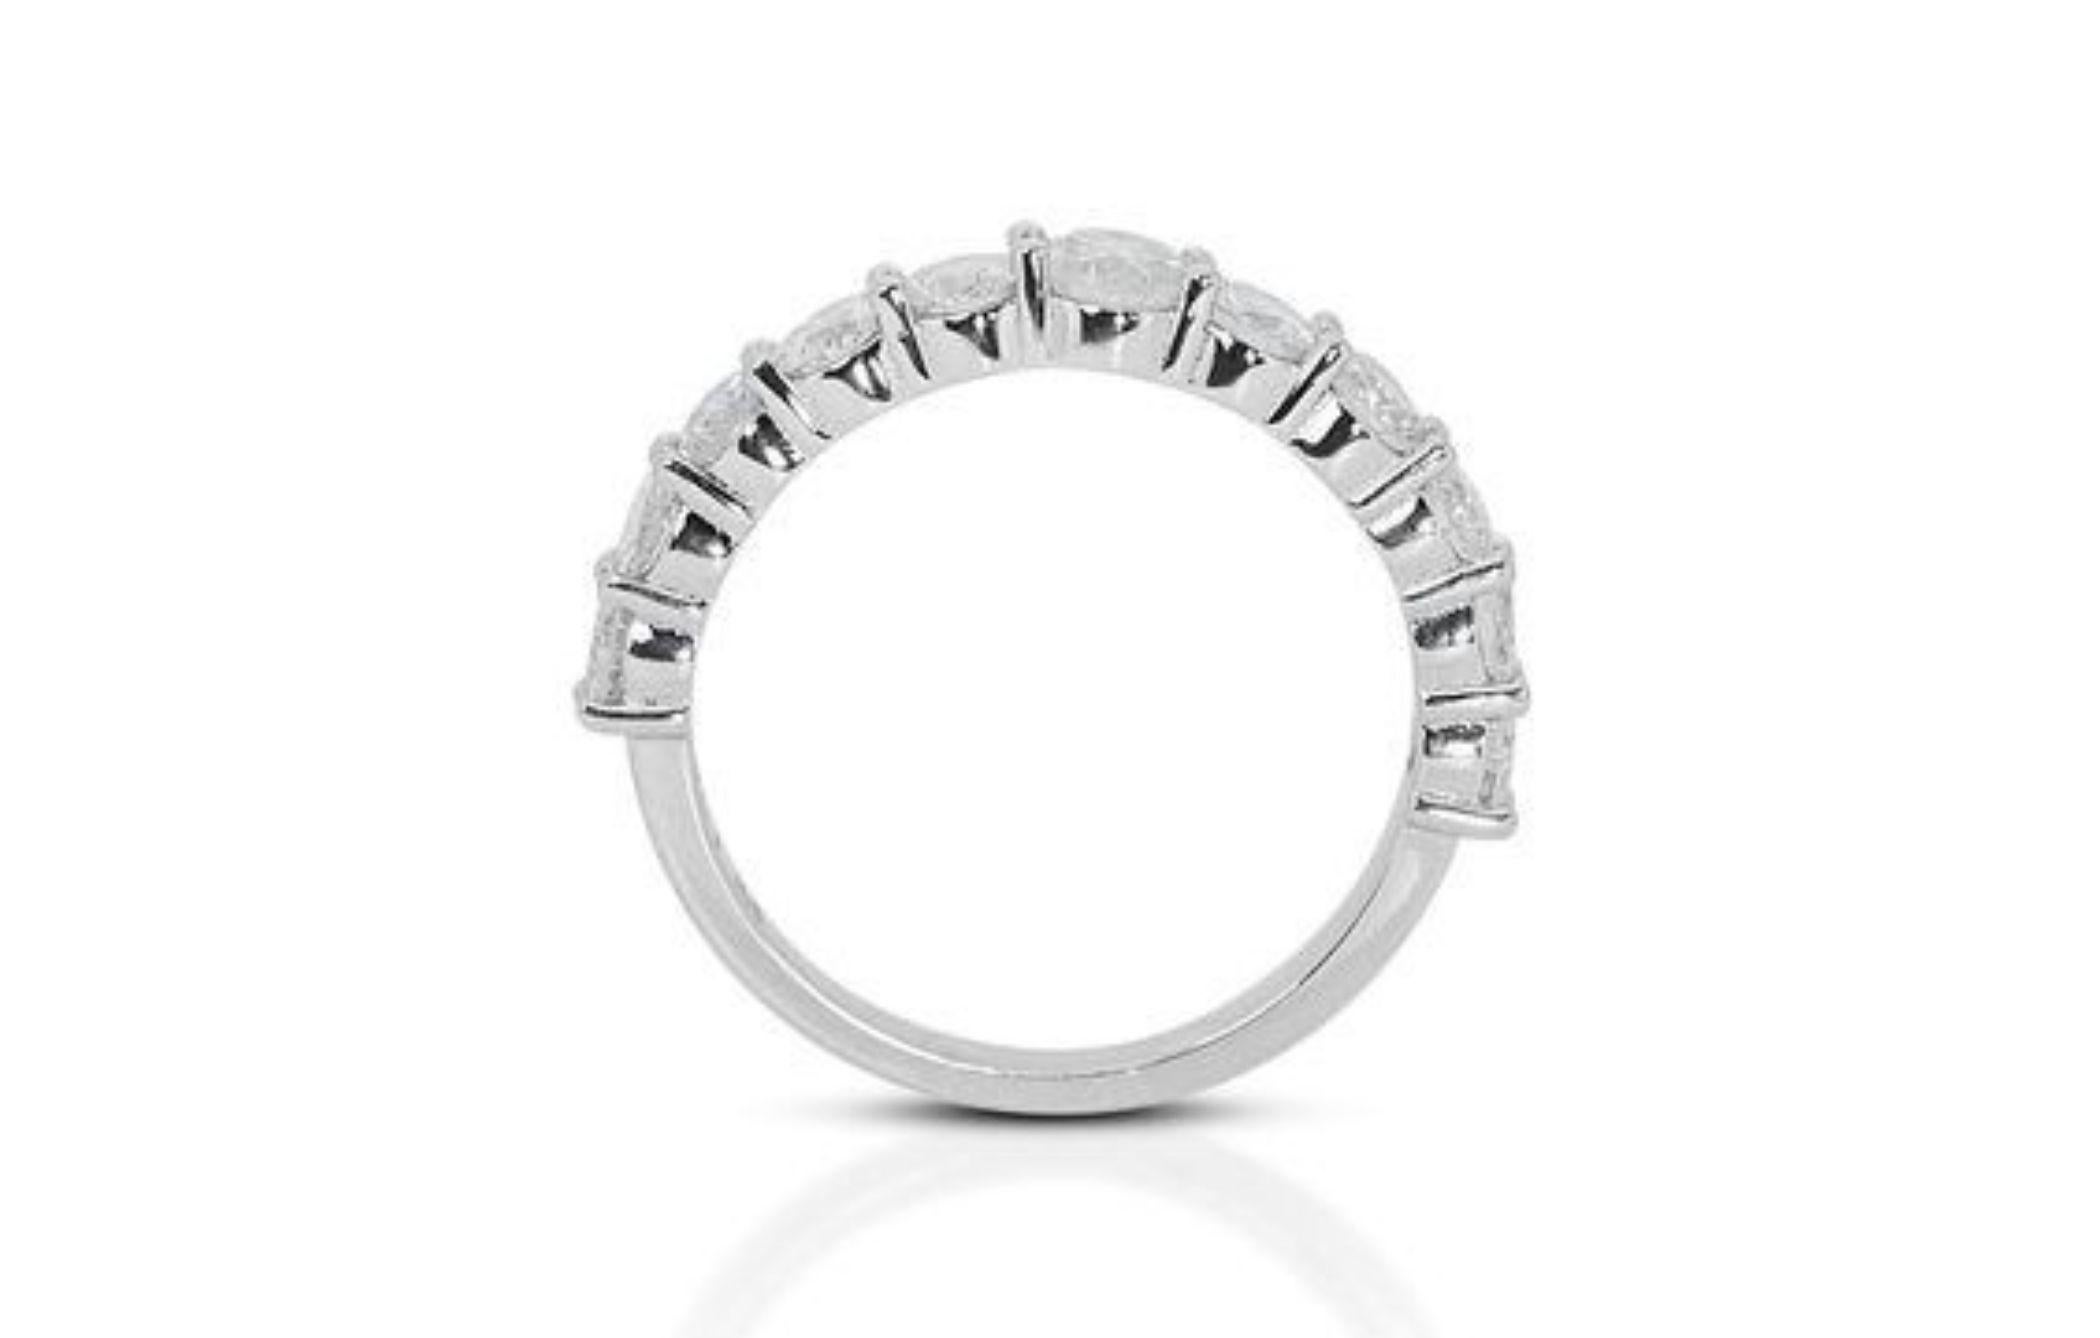 Stunning 1.58ct Round Brilliant Diamond Ring in 14k White Gold For Sale 2